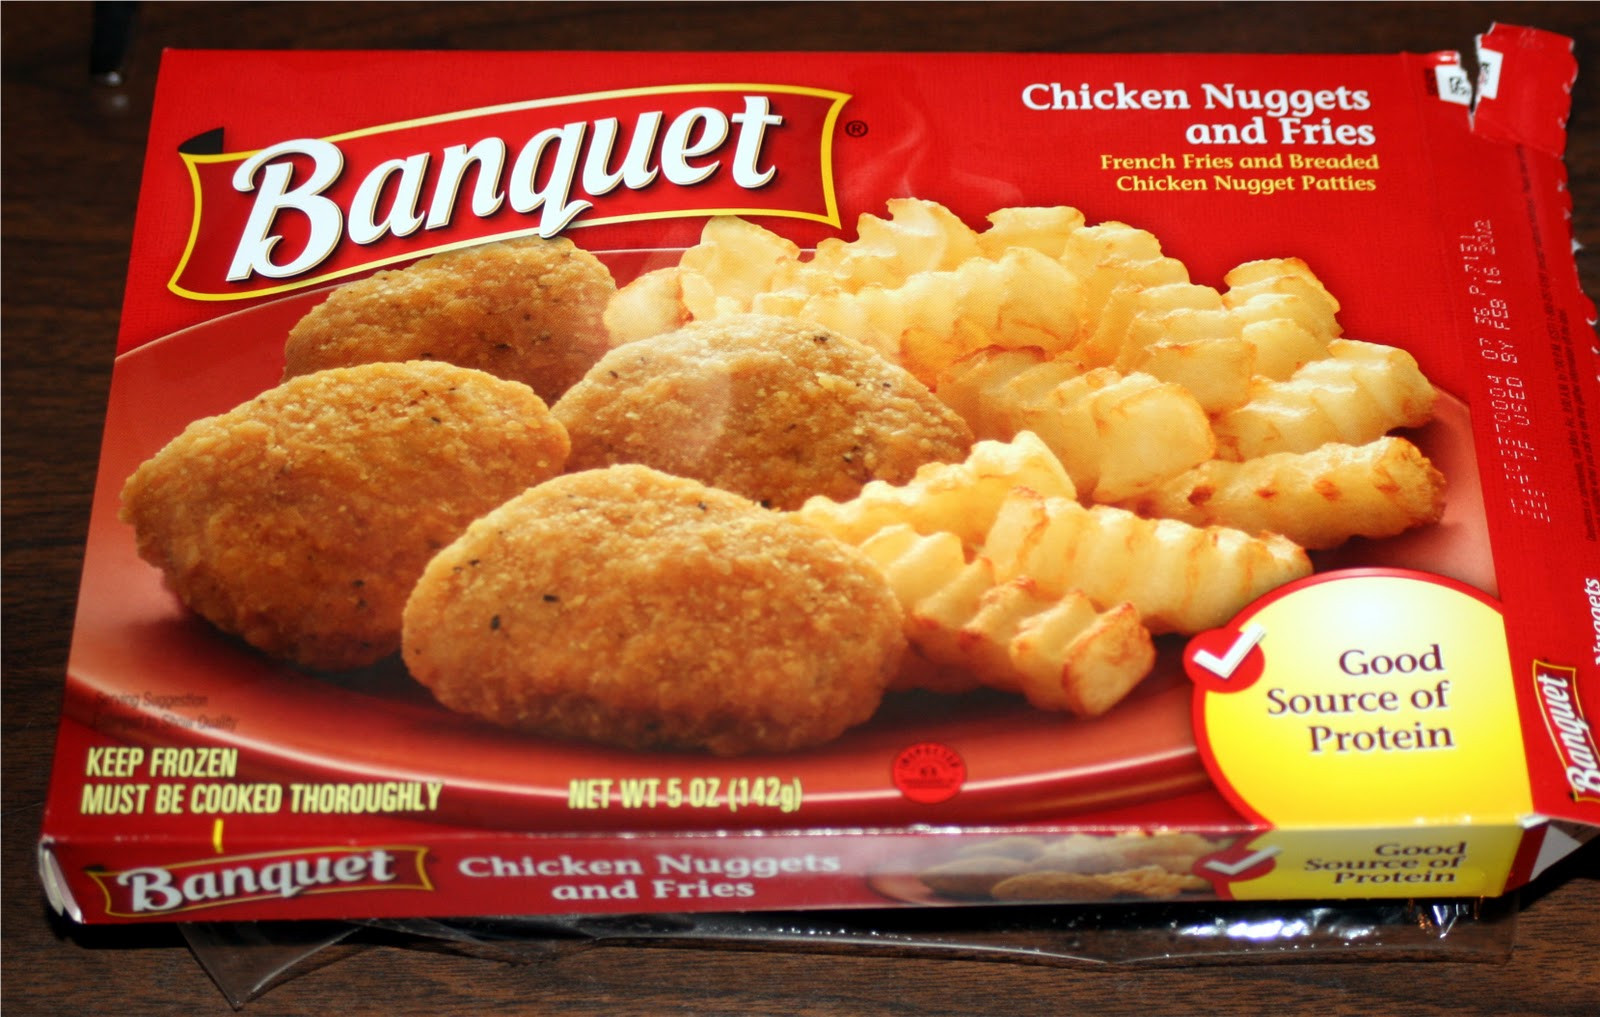 Banquet Tv Dinners
 Forsythkid A Critique of Banquet’s Chicken Nug s and Fries